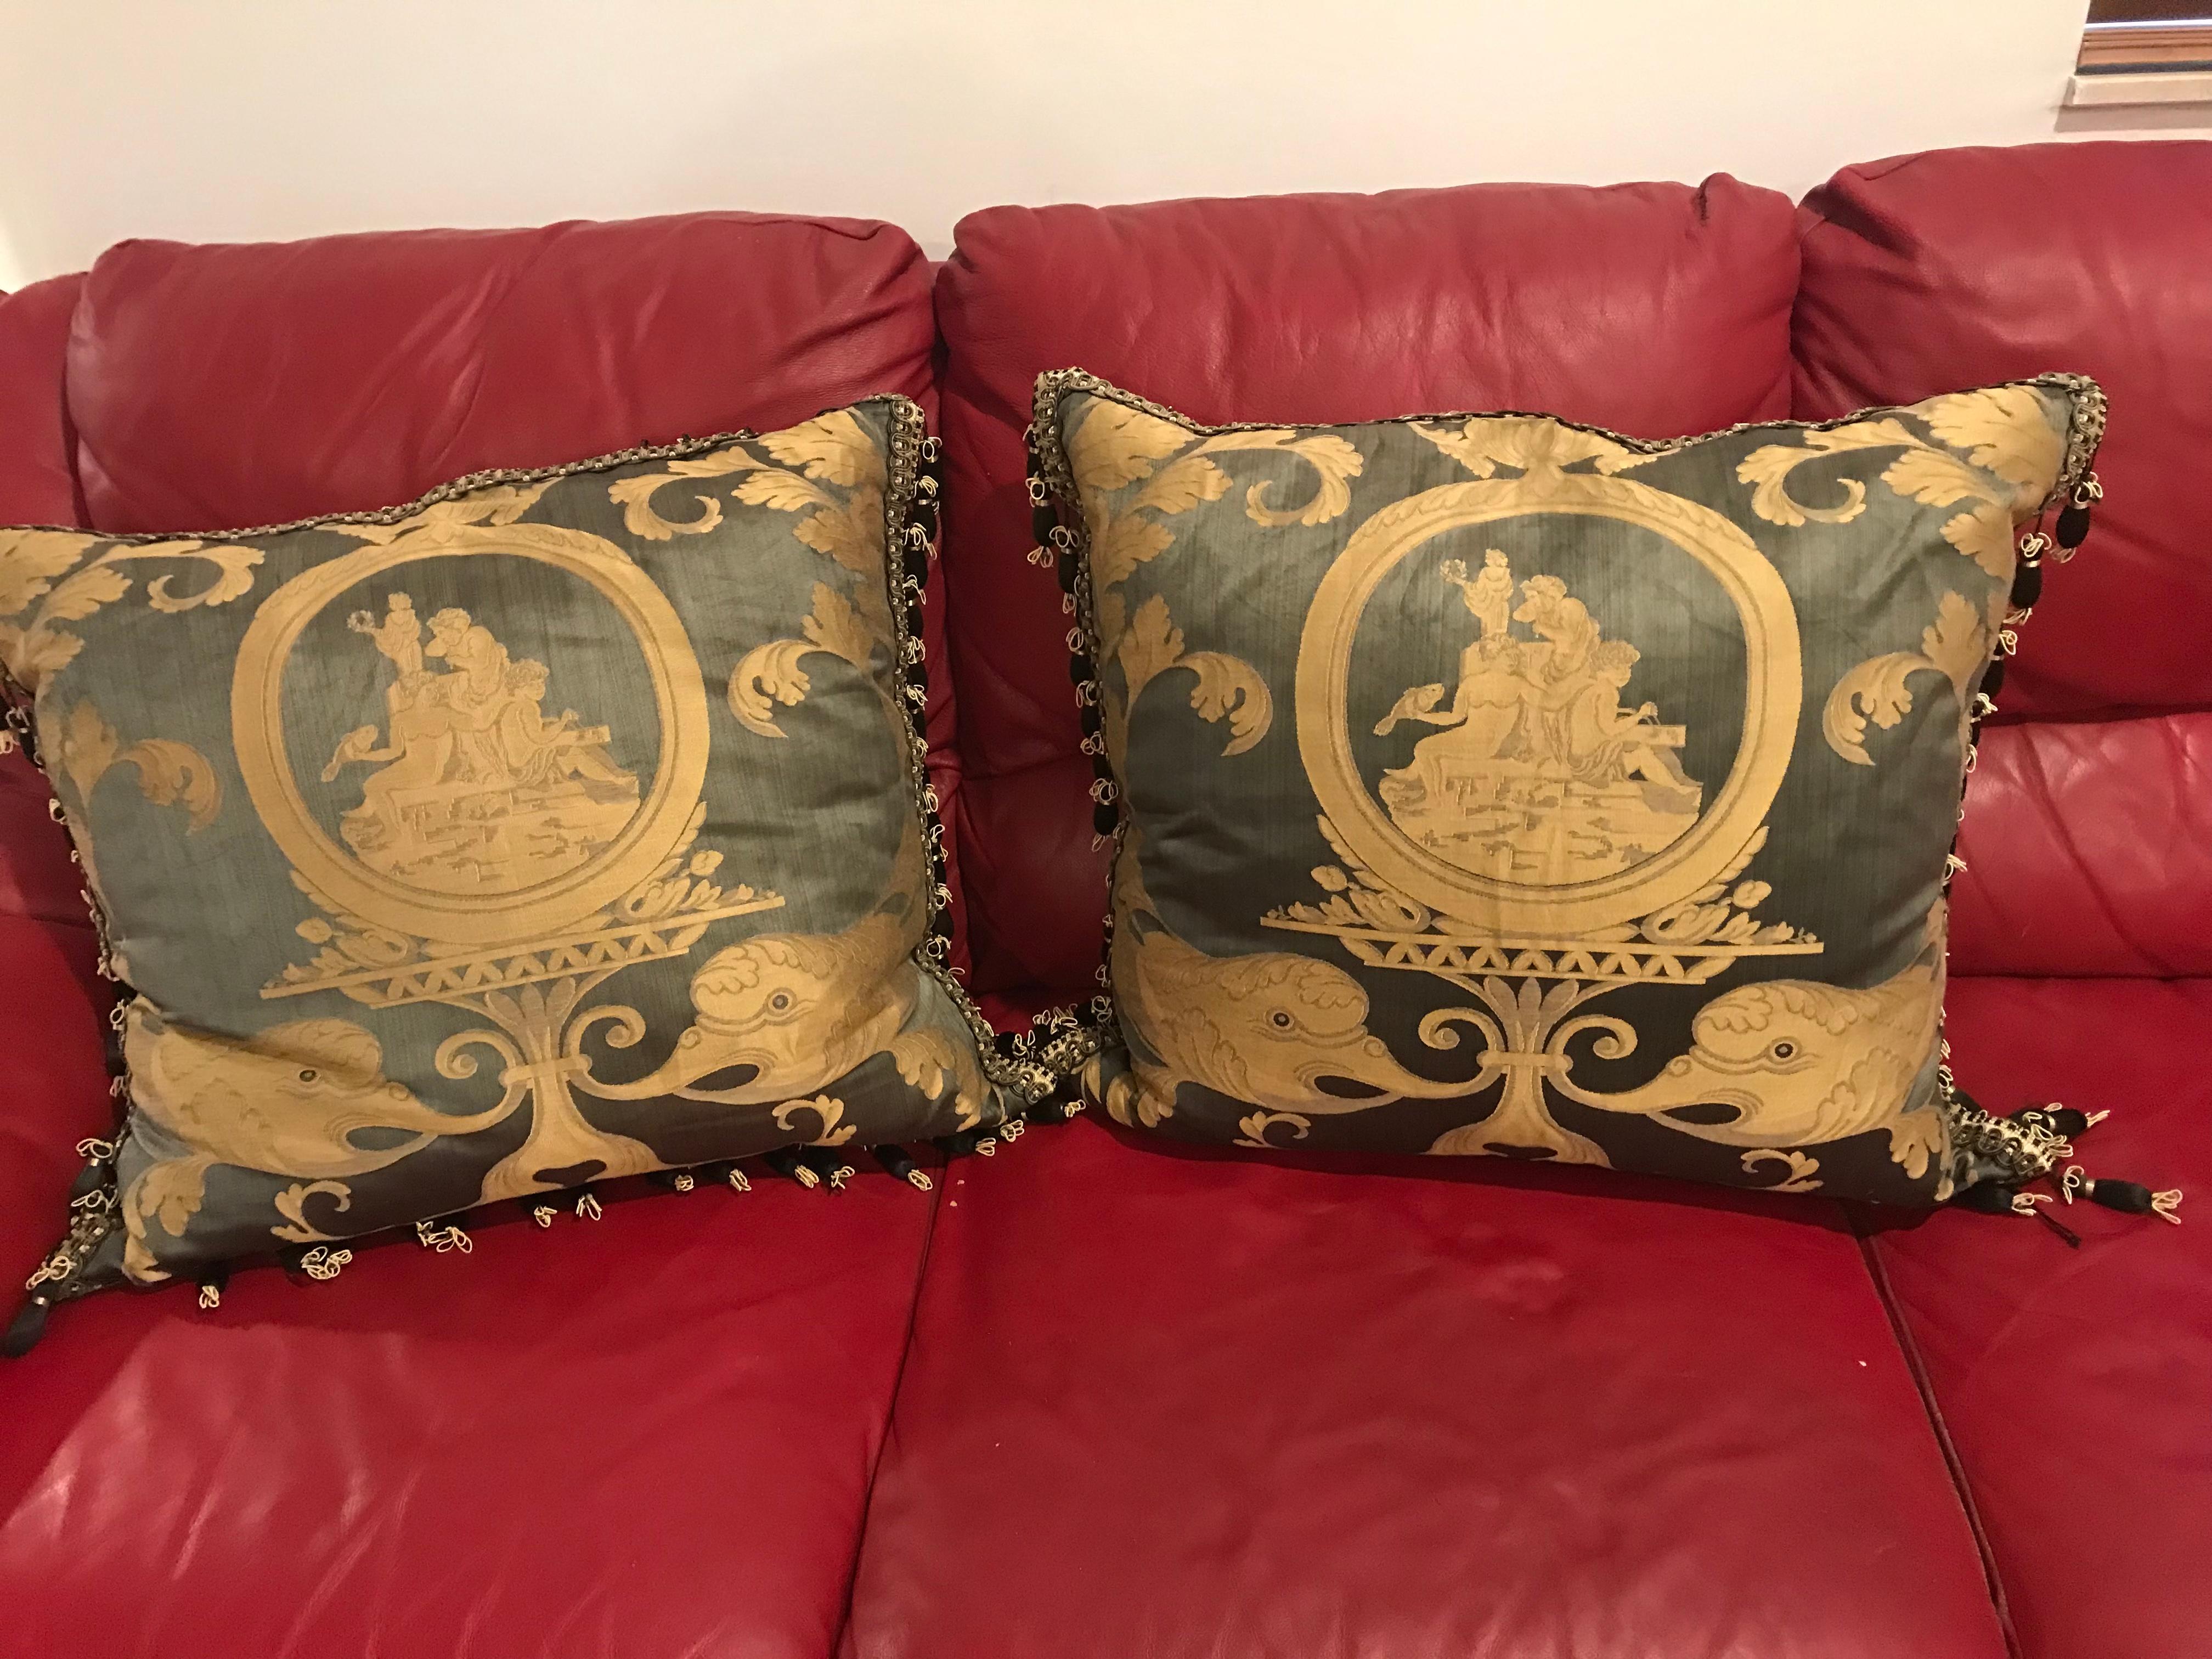 Beautiful pair of Fortuny pillows.